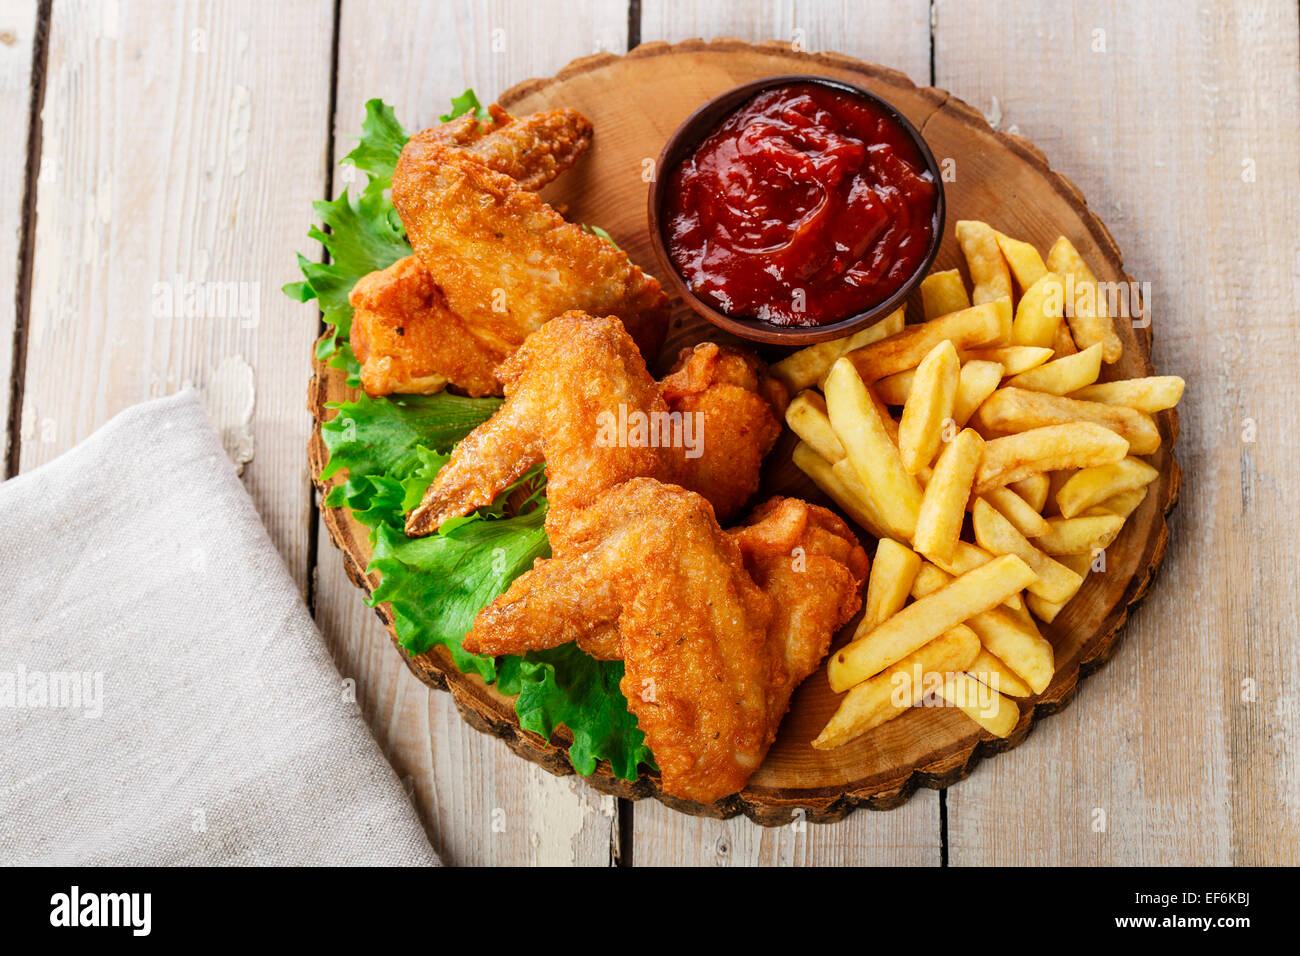 Fried chicken wings with sauce and French fries Stock Photo